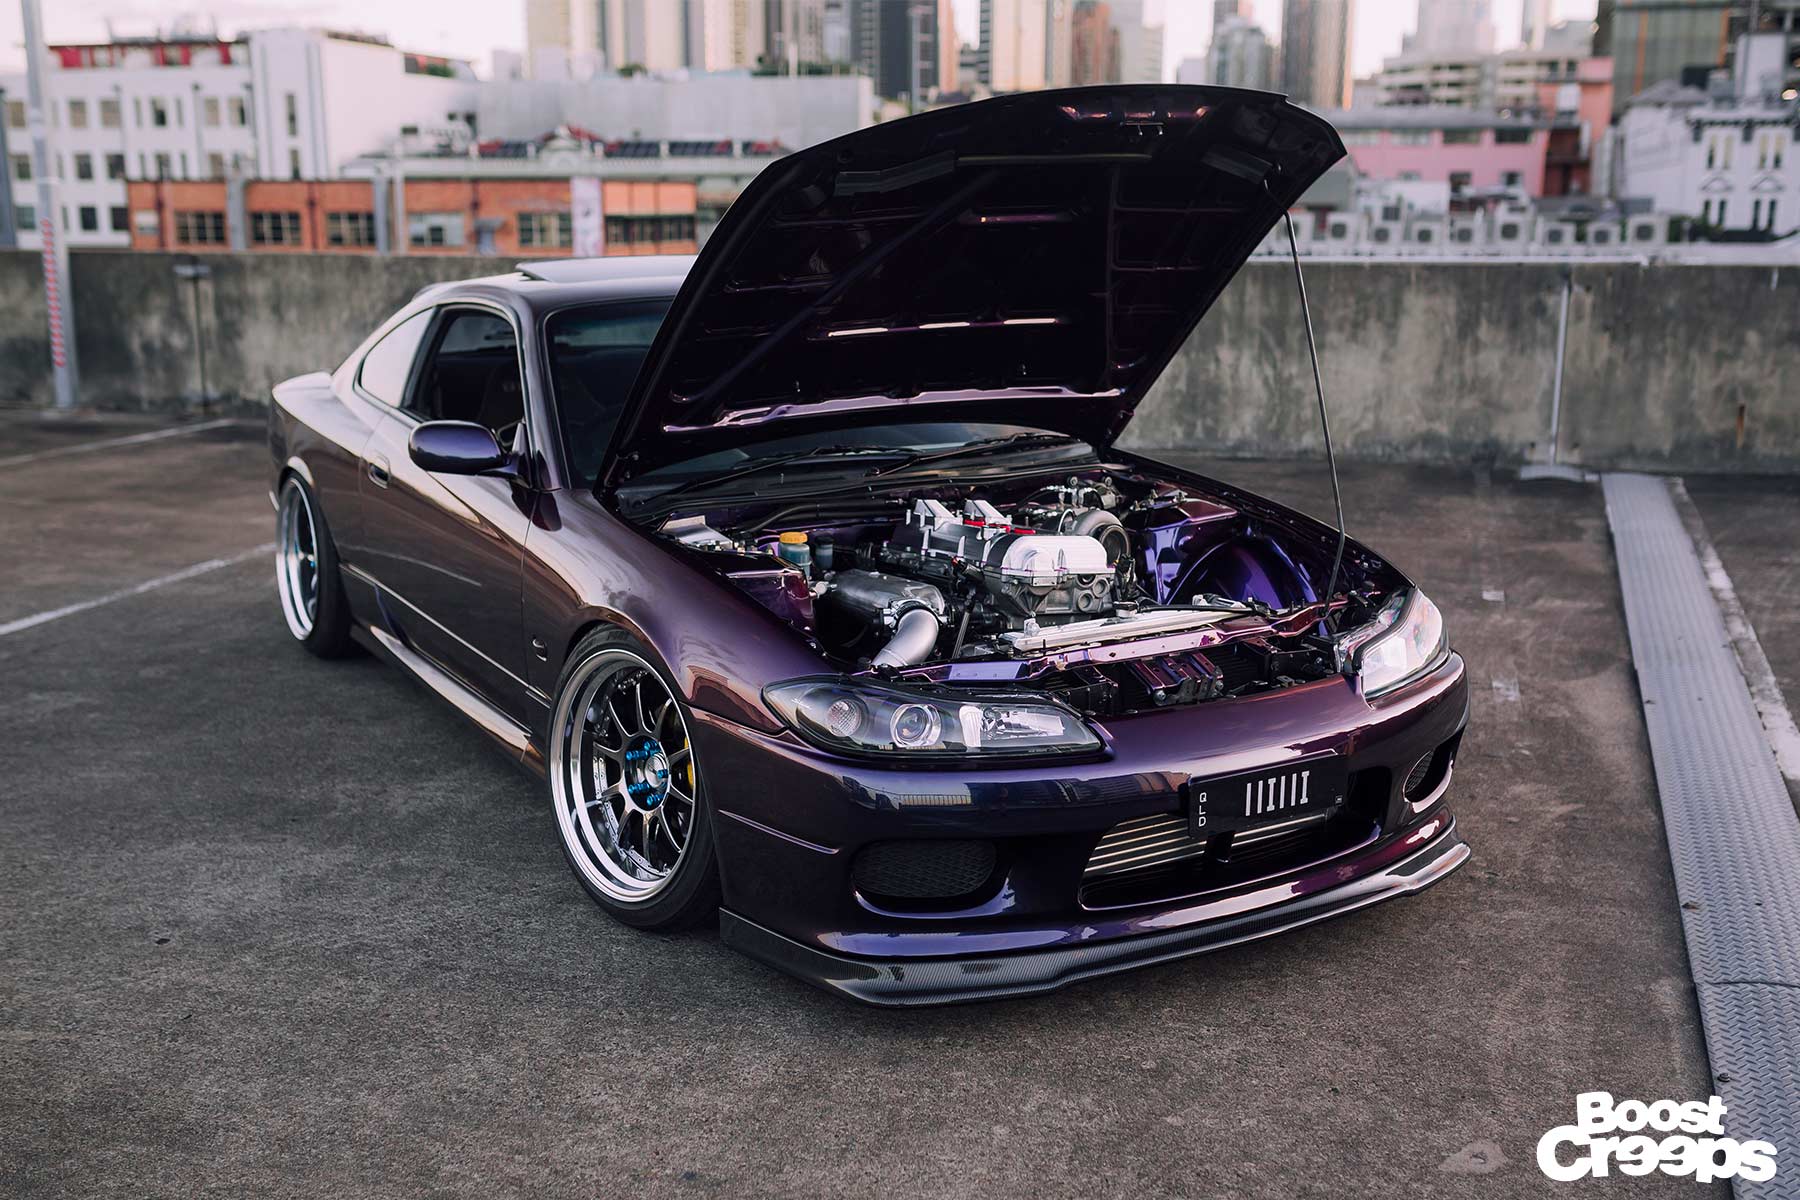 Midnight Purple 3 200SX S15 with shaved engine bay showing